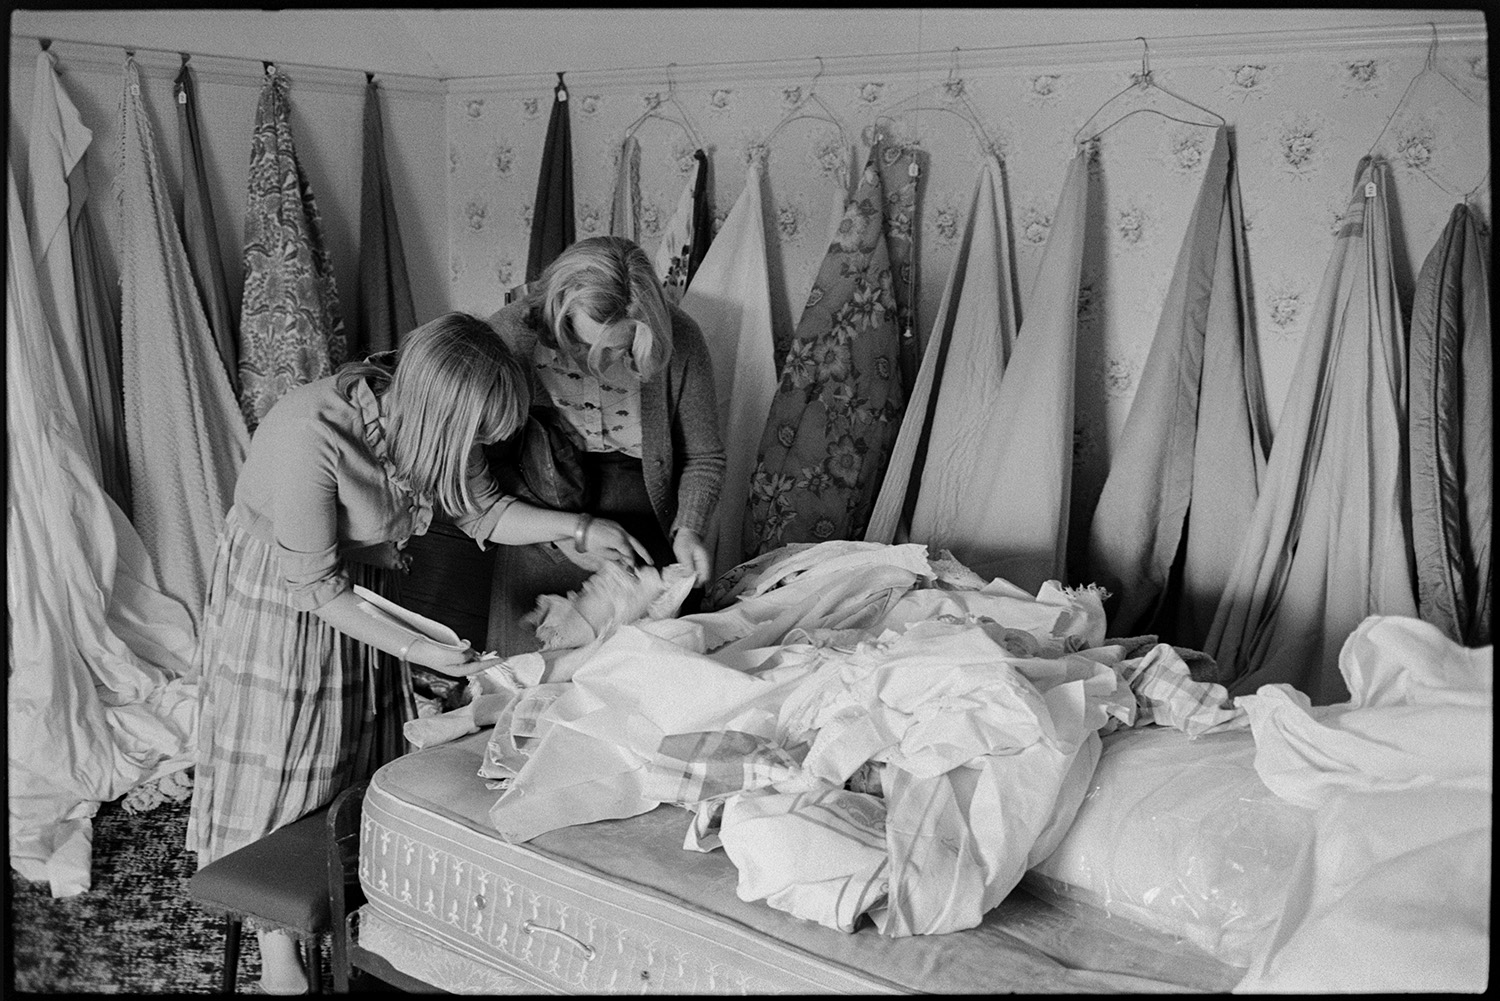 People viewing house contents before sale, bedroom furniture, lace, material. 
[Two women looking through fabric on a mattress at Arscotts House, Dolton, on the viewing day before the contents sale of the house. Material is also hung up on the walls of the bedroom.]